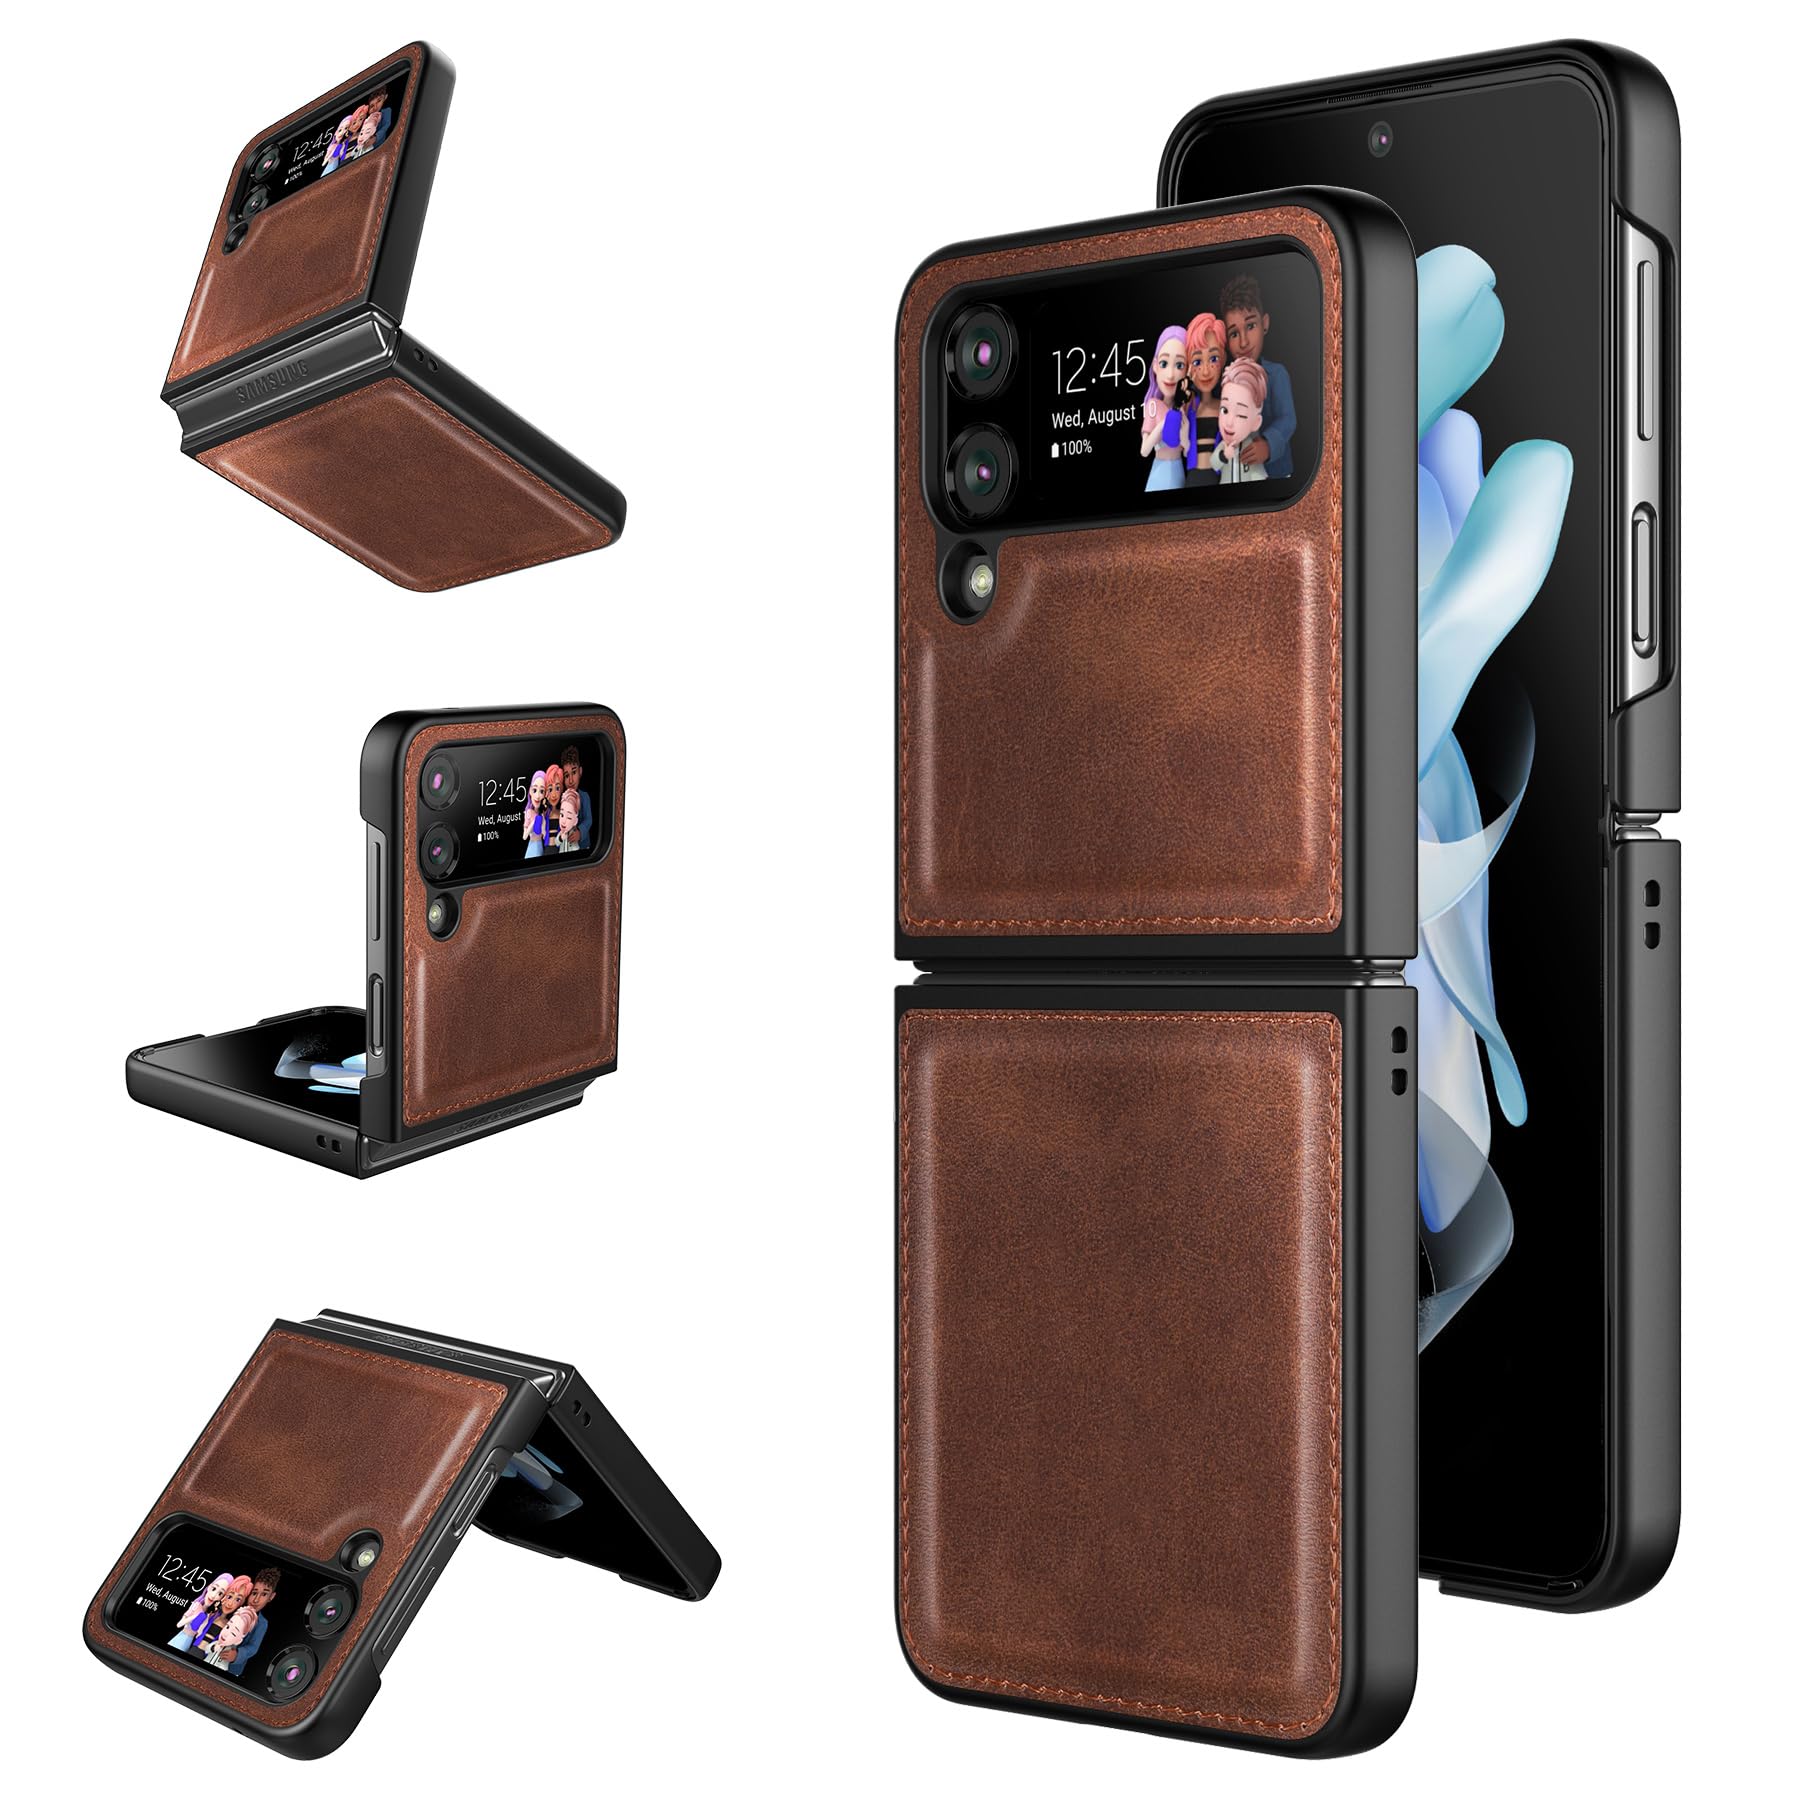 Foluu Case for Samsung Galaxy Z Flip 4 5G 2022, Galaxy Z Flip 4 Leather Case, PU Leather + Hard PC Shell Ultra Thin Slim Durable Protective Phone Case Cover for (Brown)